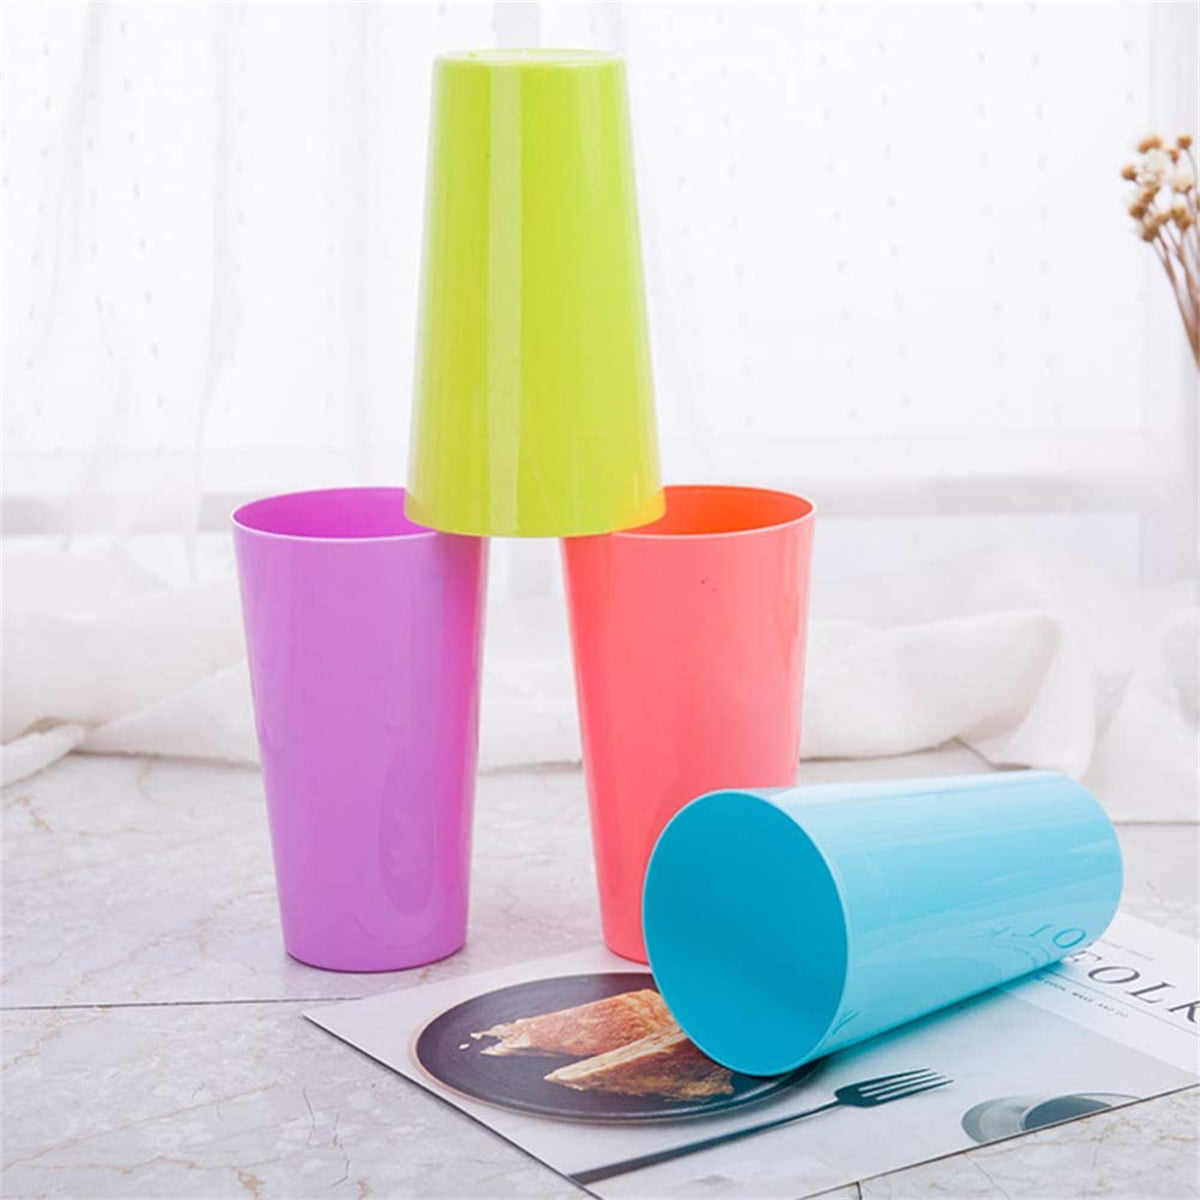 Multi Use Plastic Drinking Cups Ribbed Design 5oz - BH Medwear